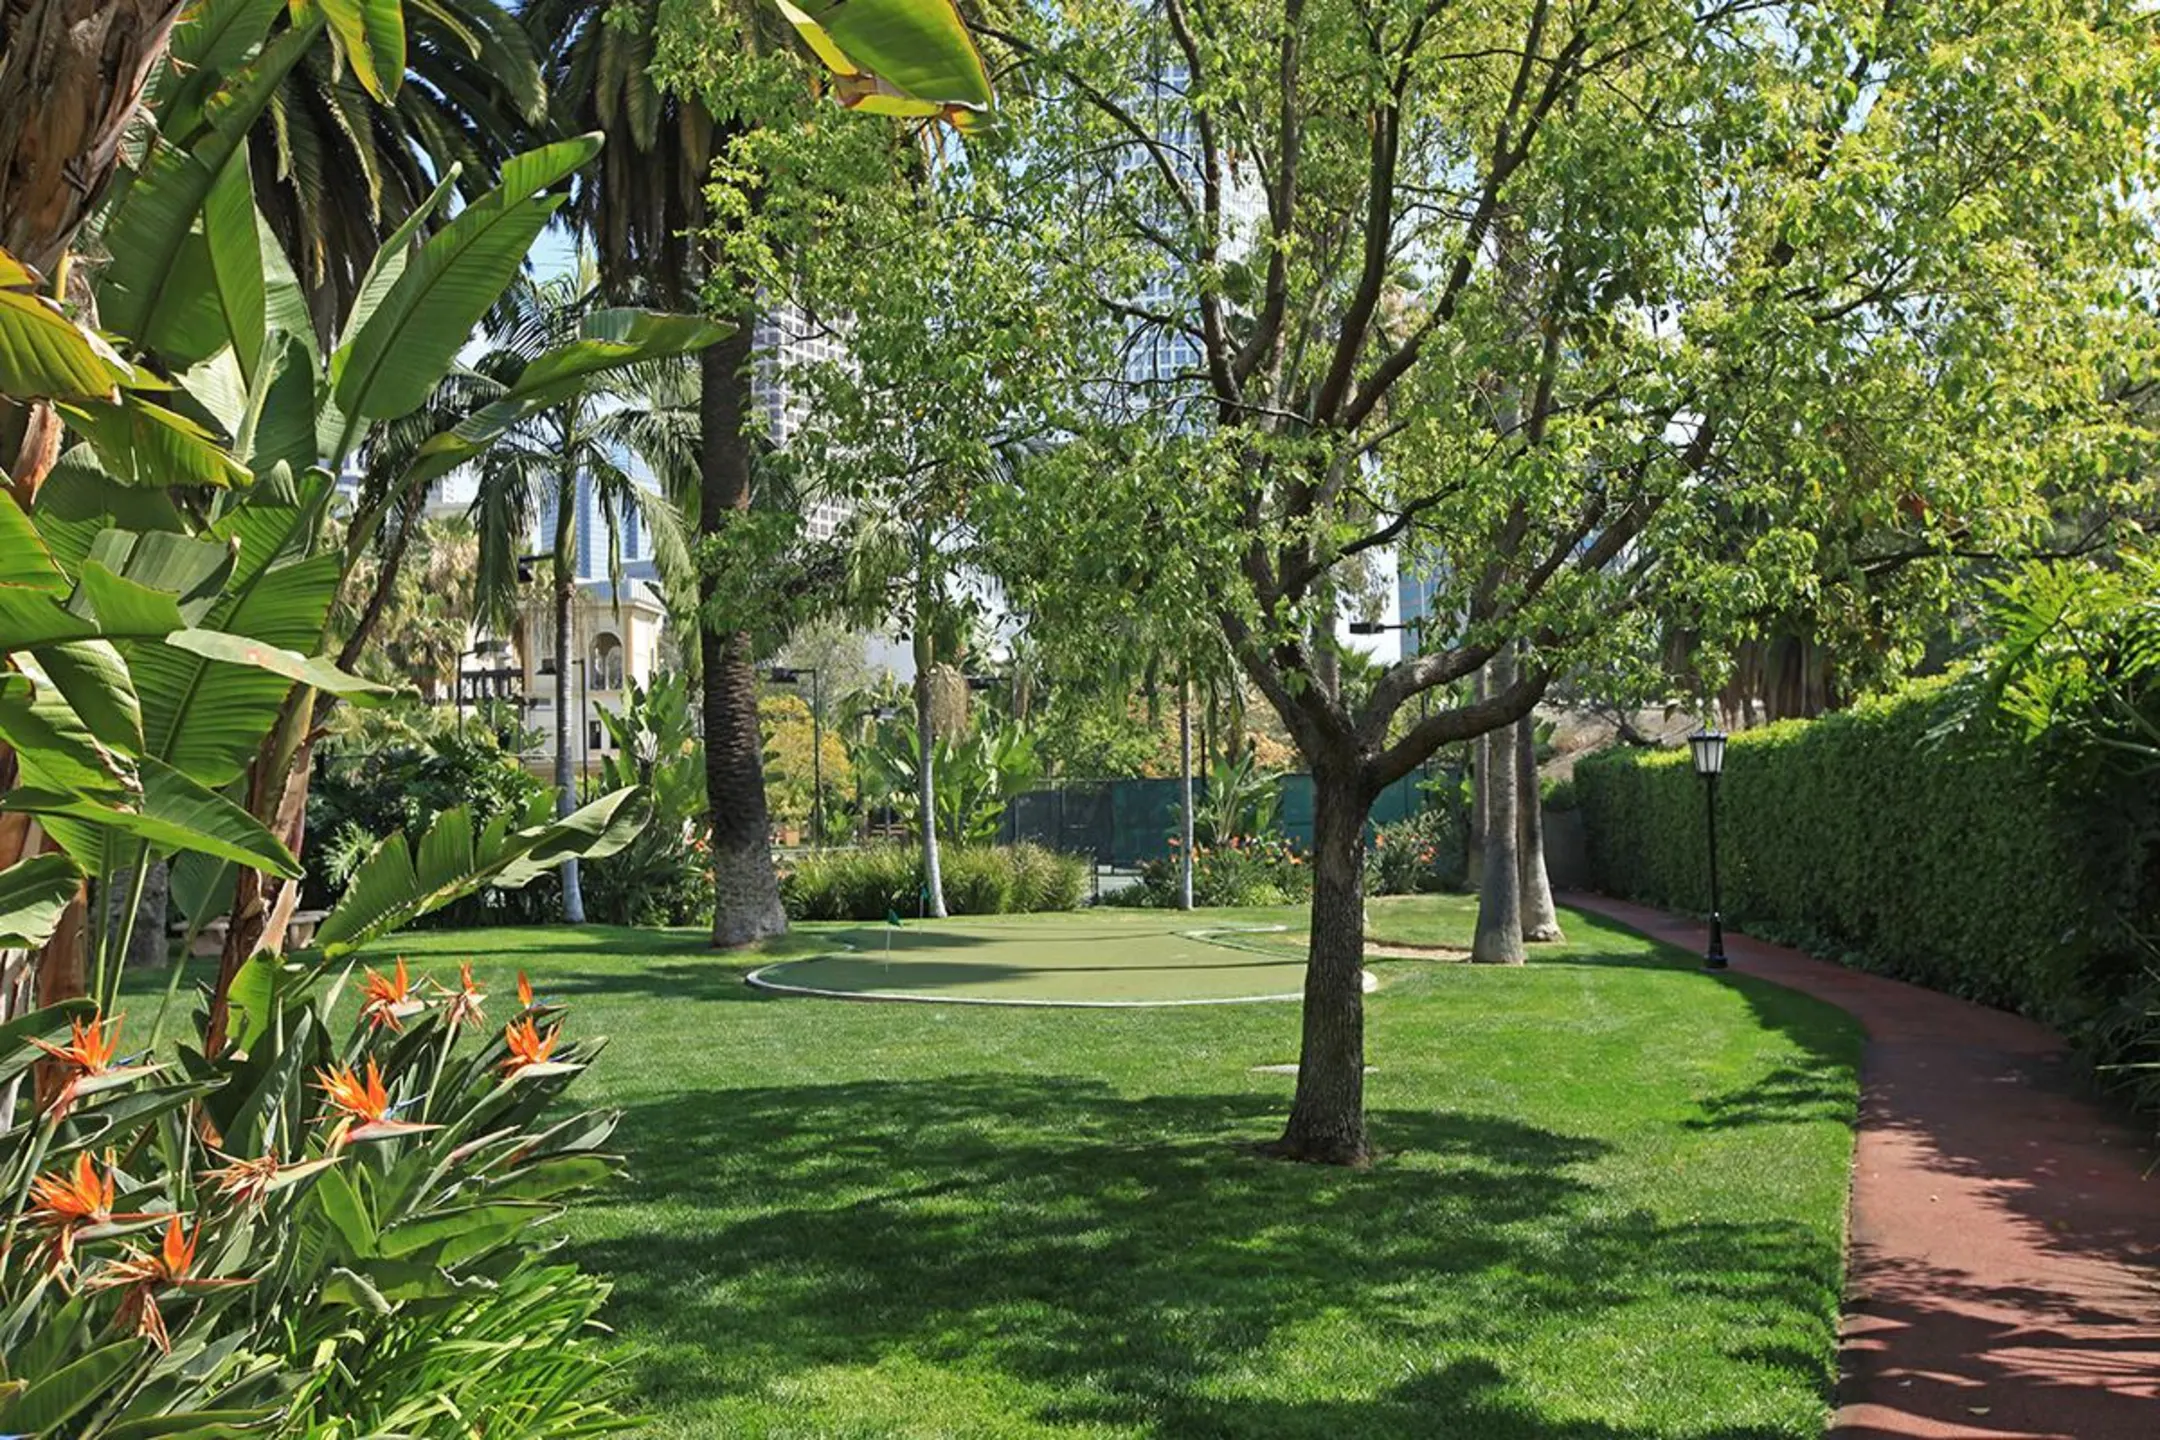 Landscaping - The Medici - Los Angeles, CA